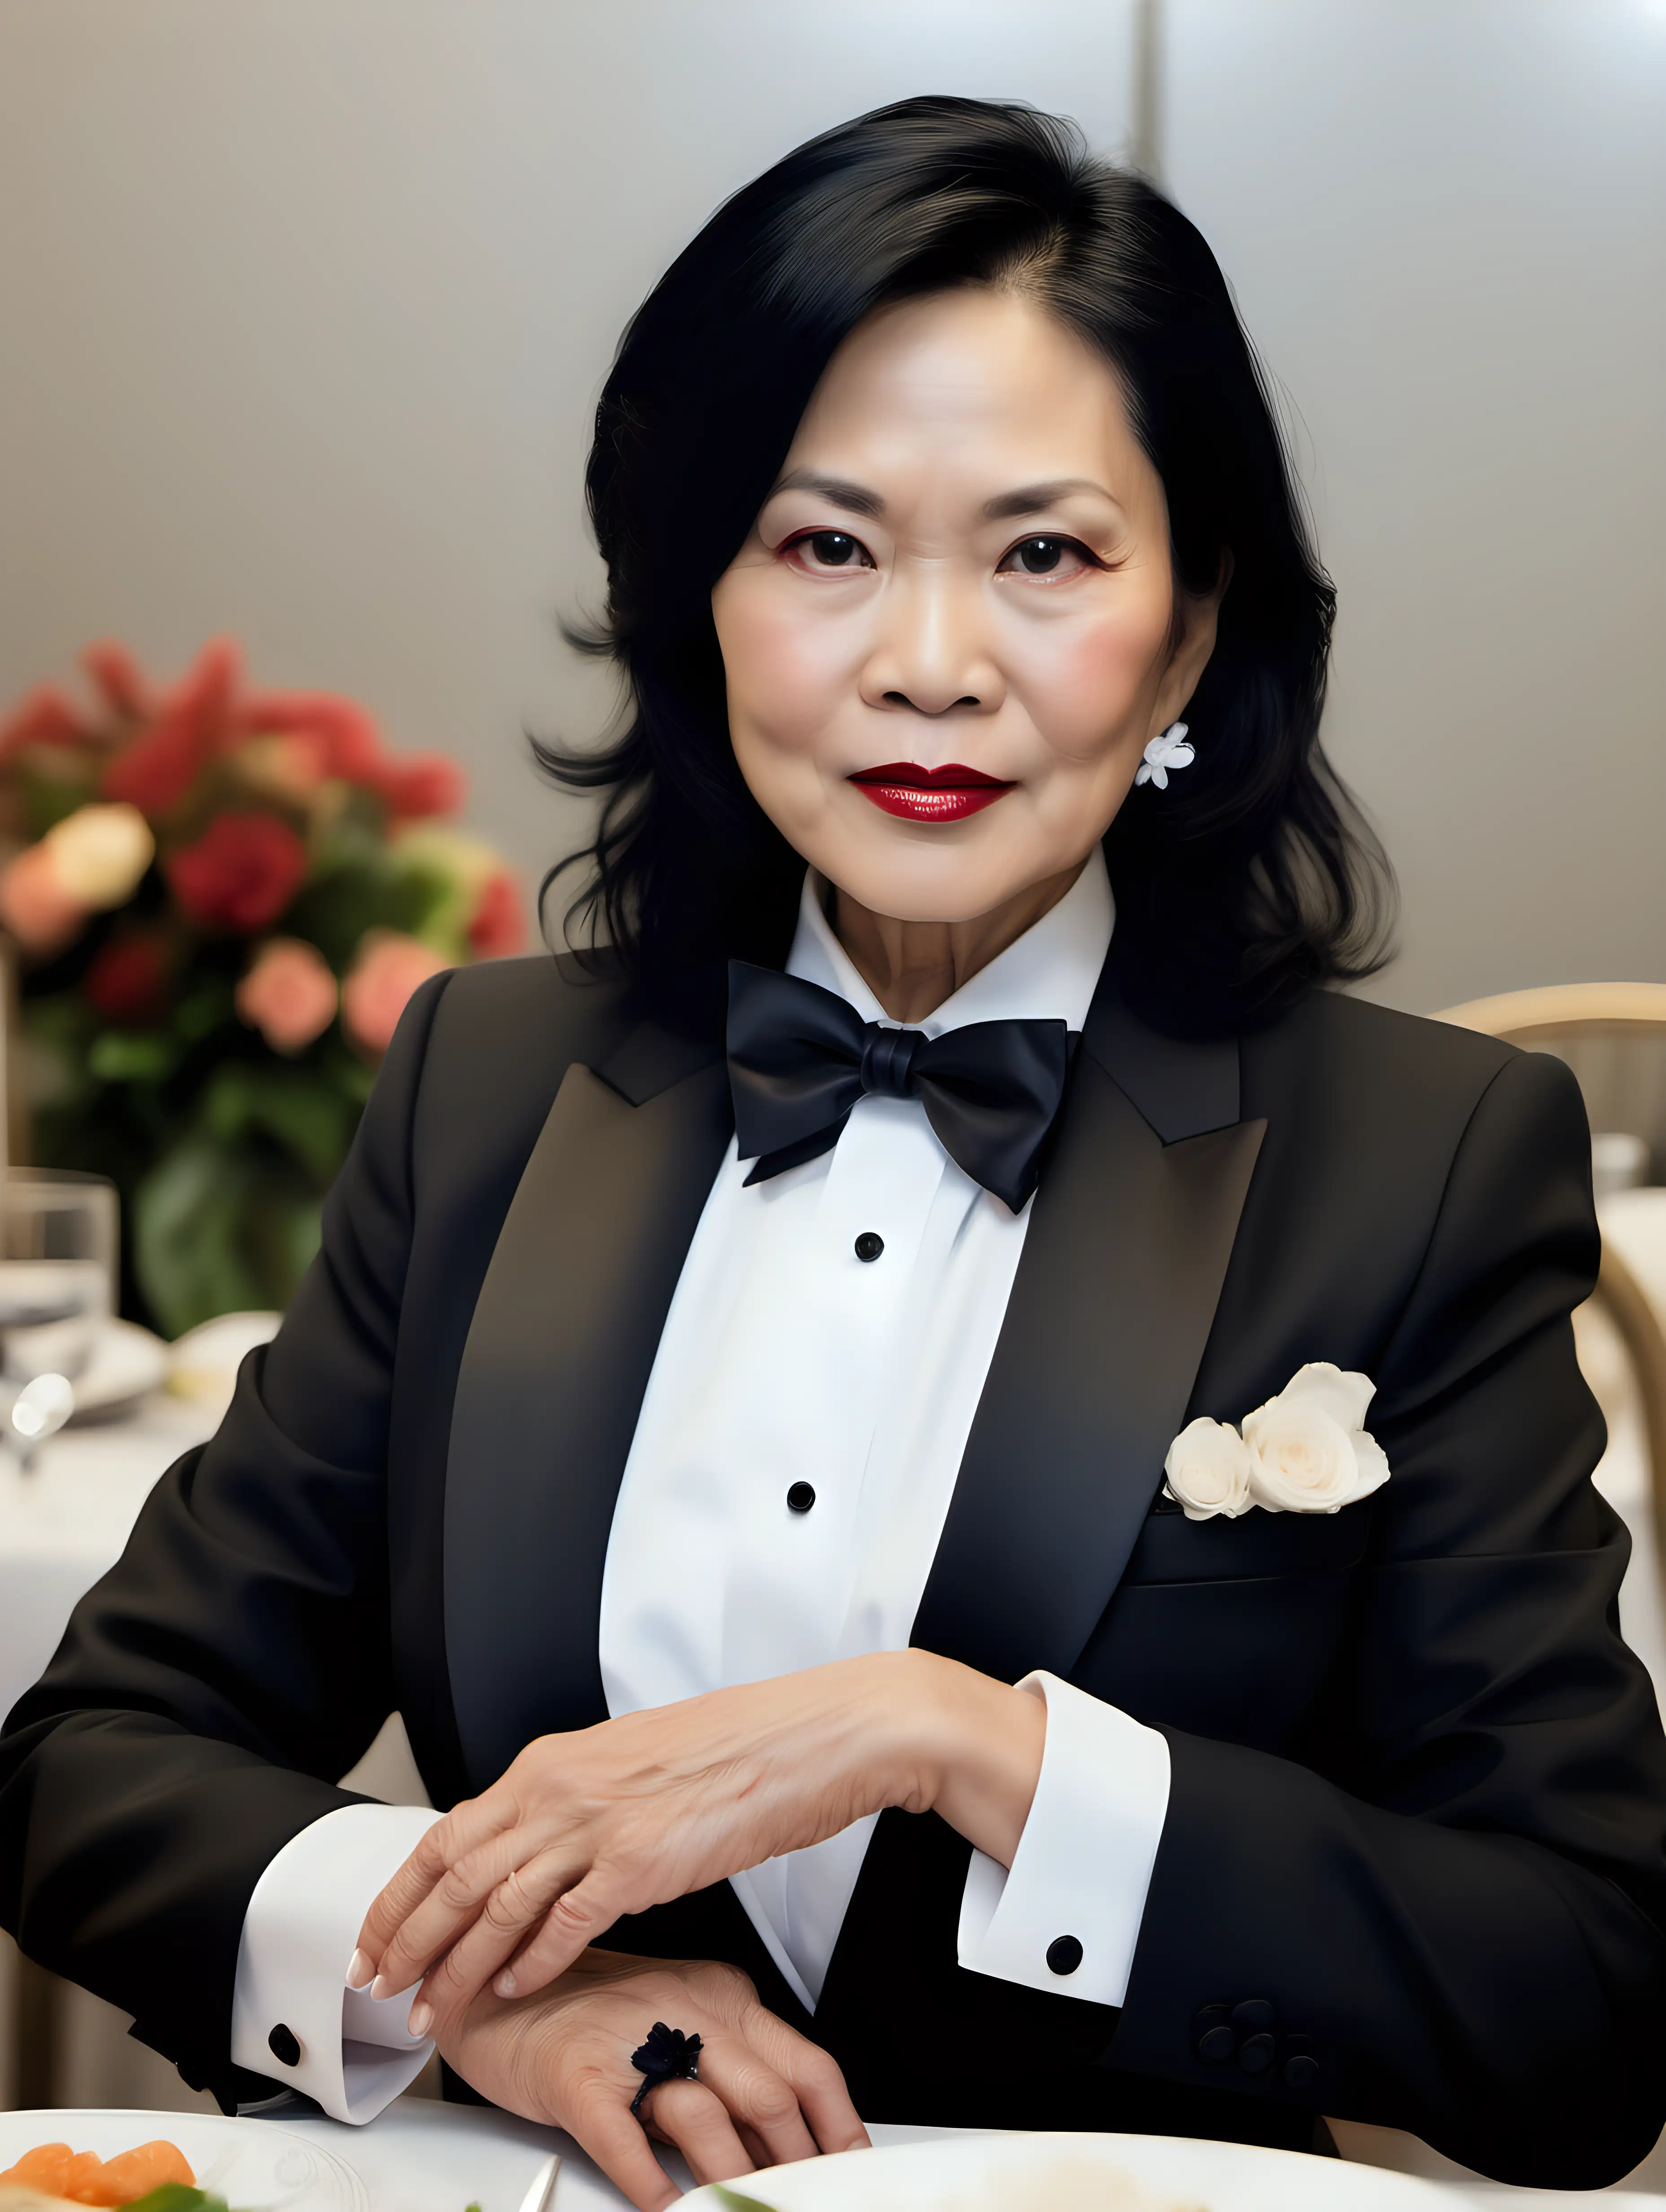 50 year old stern Vietnamese businesswoman with black shoulder length hair and lipstick wearing a tuxedo with a black bow tie and big black cufflinks. Her jacket has a corsage. She is sitting at a dinner table.